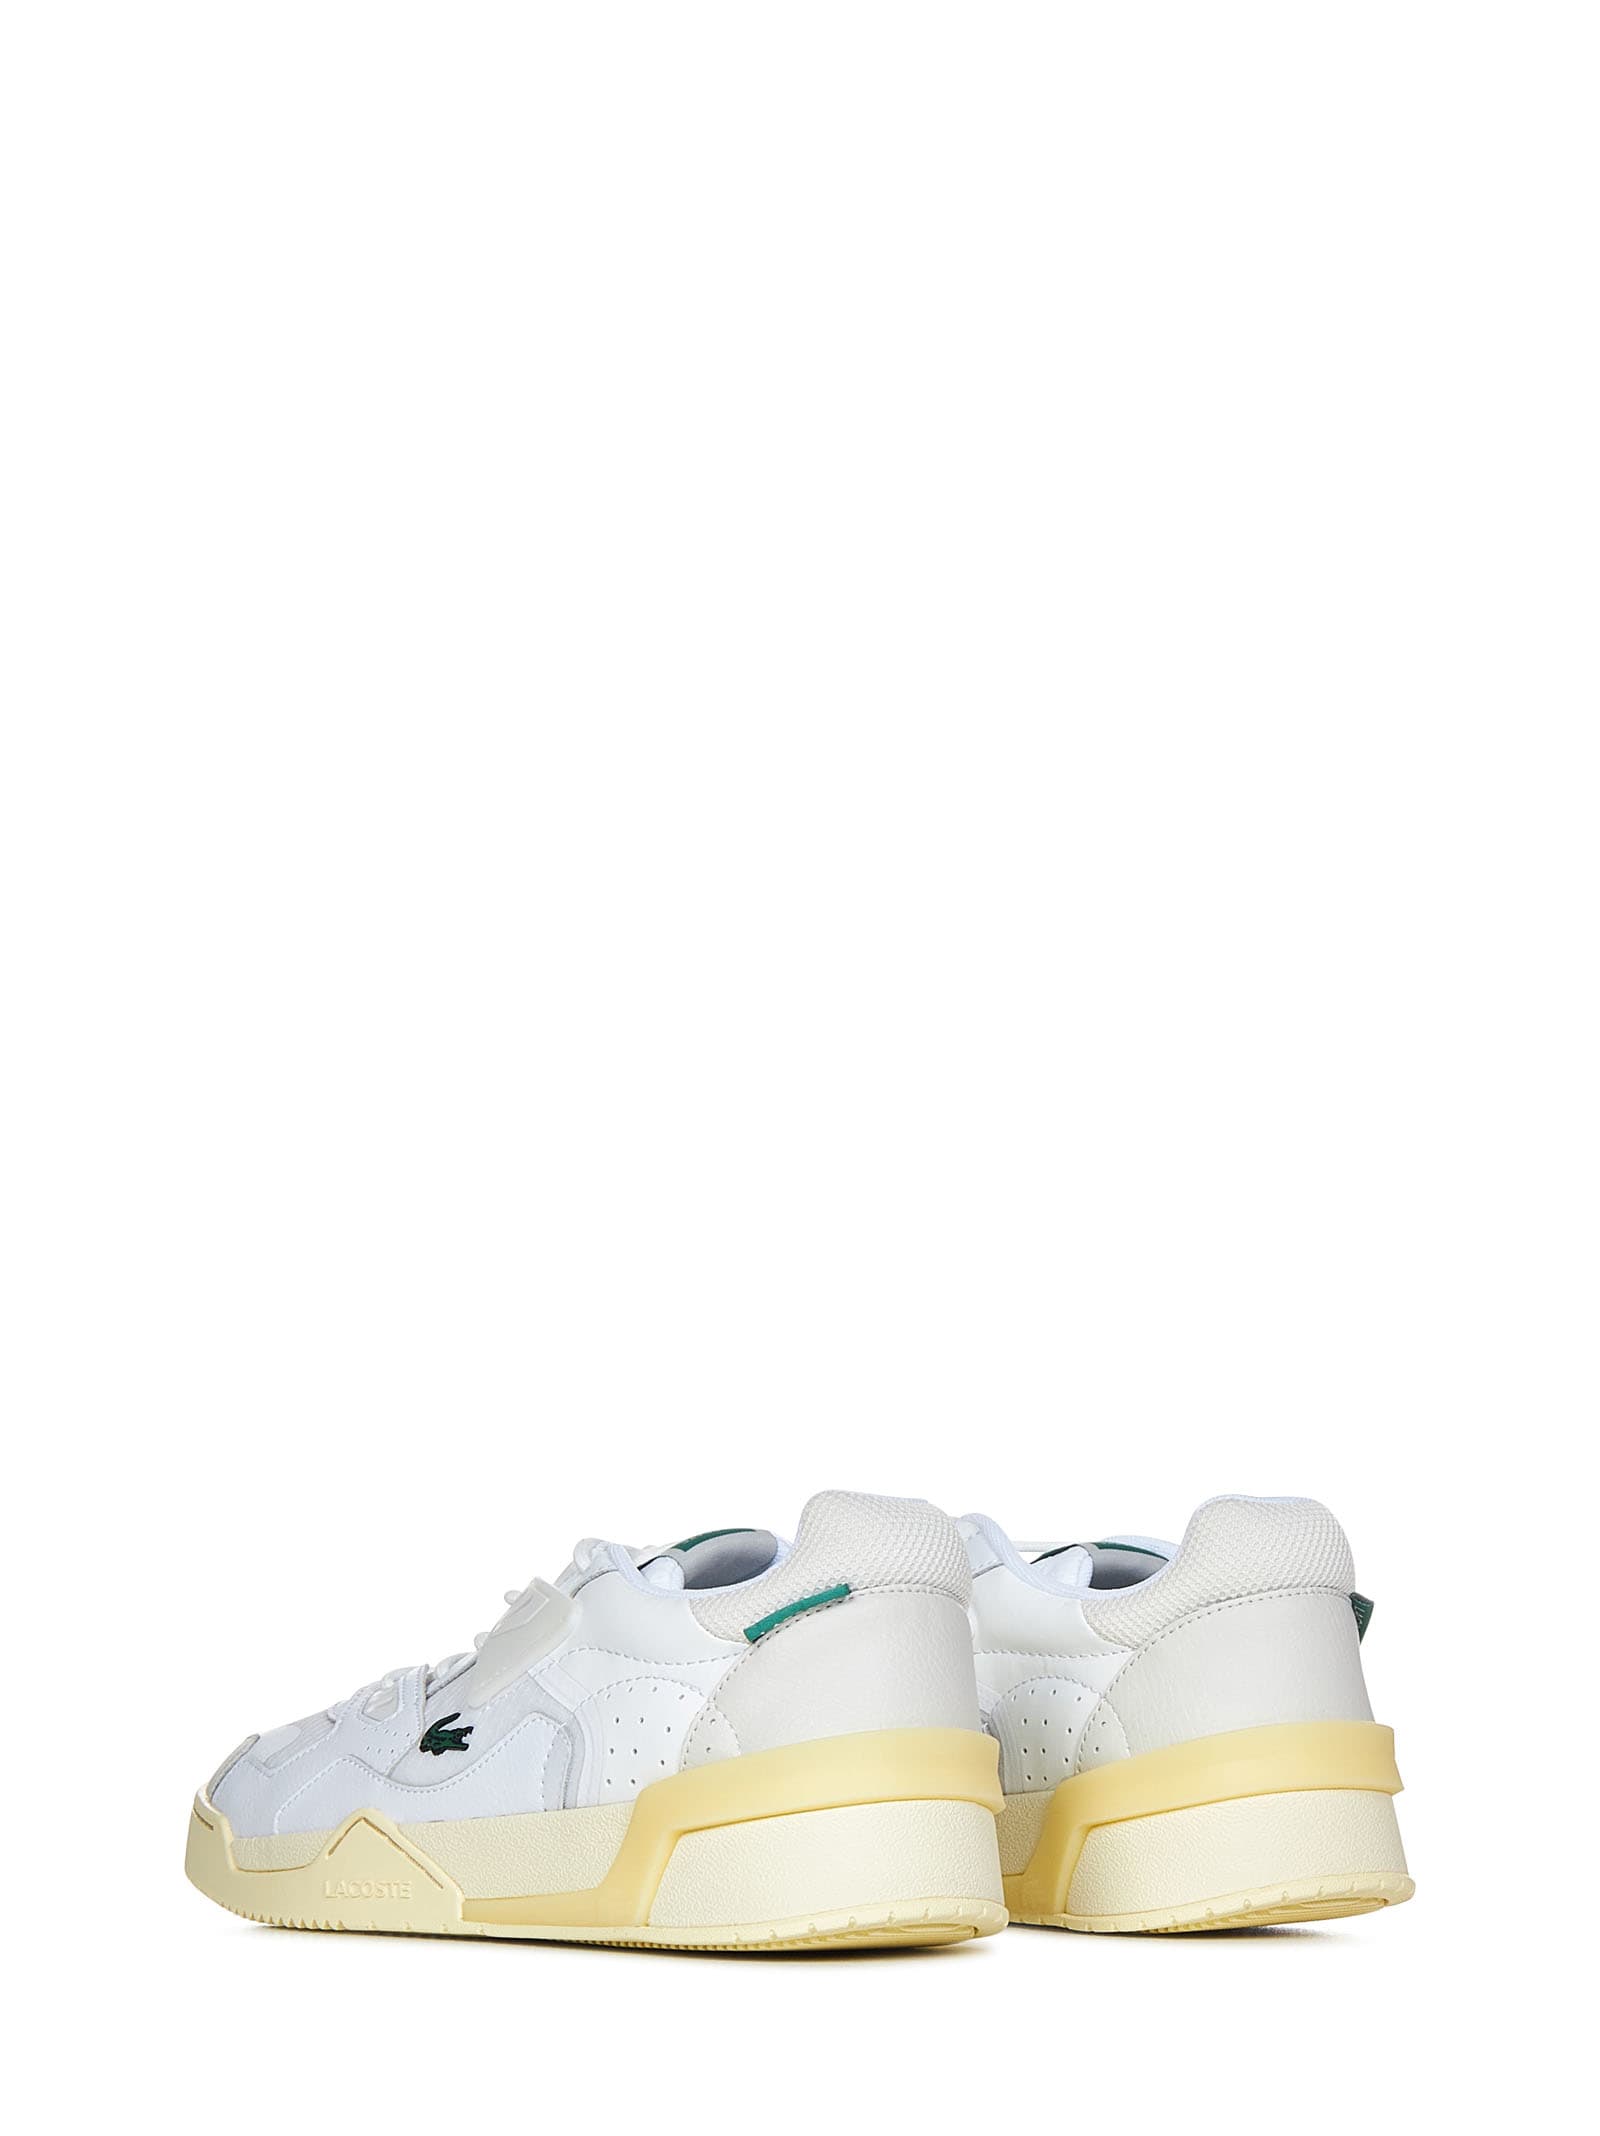 Lacoste Game Advance Panelled Leather Sneakers - Farfetch